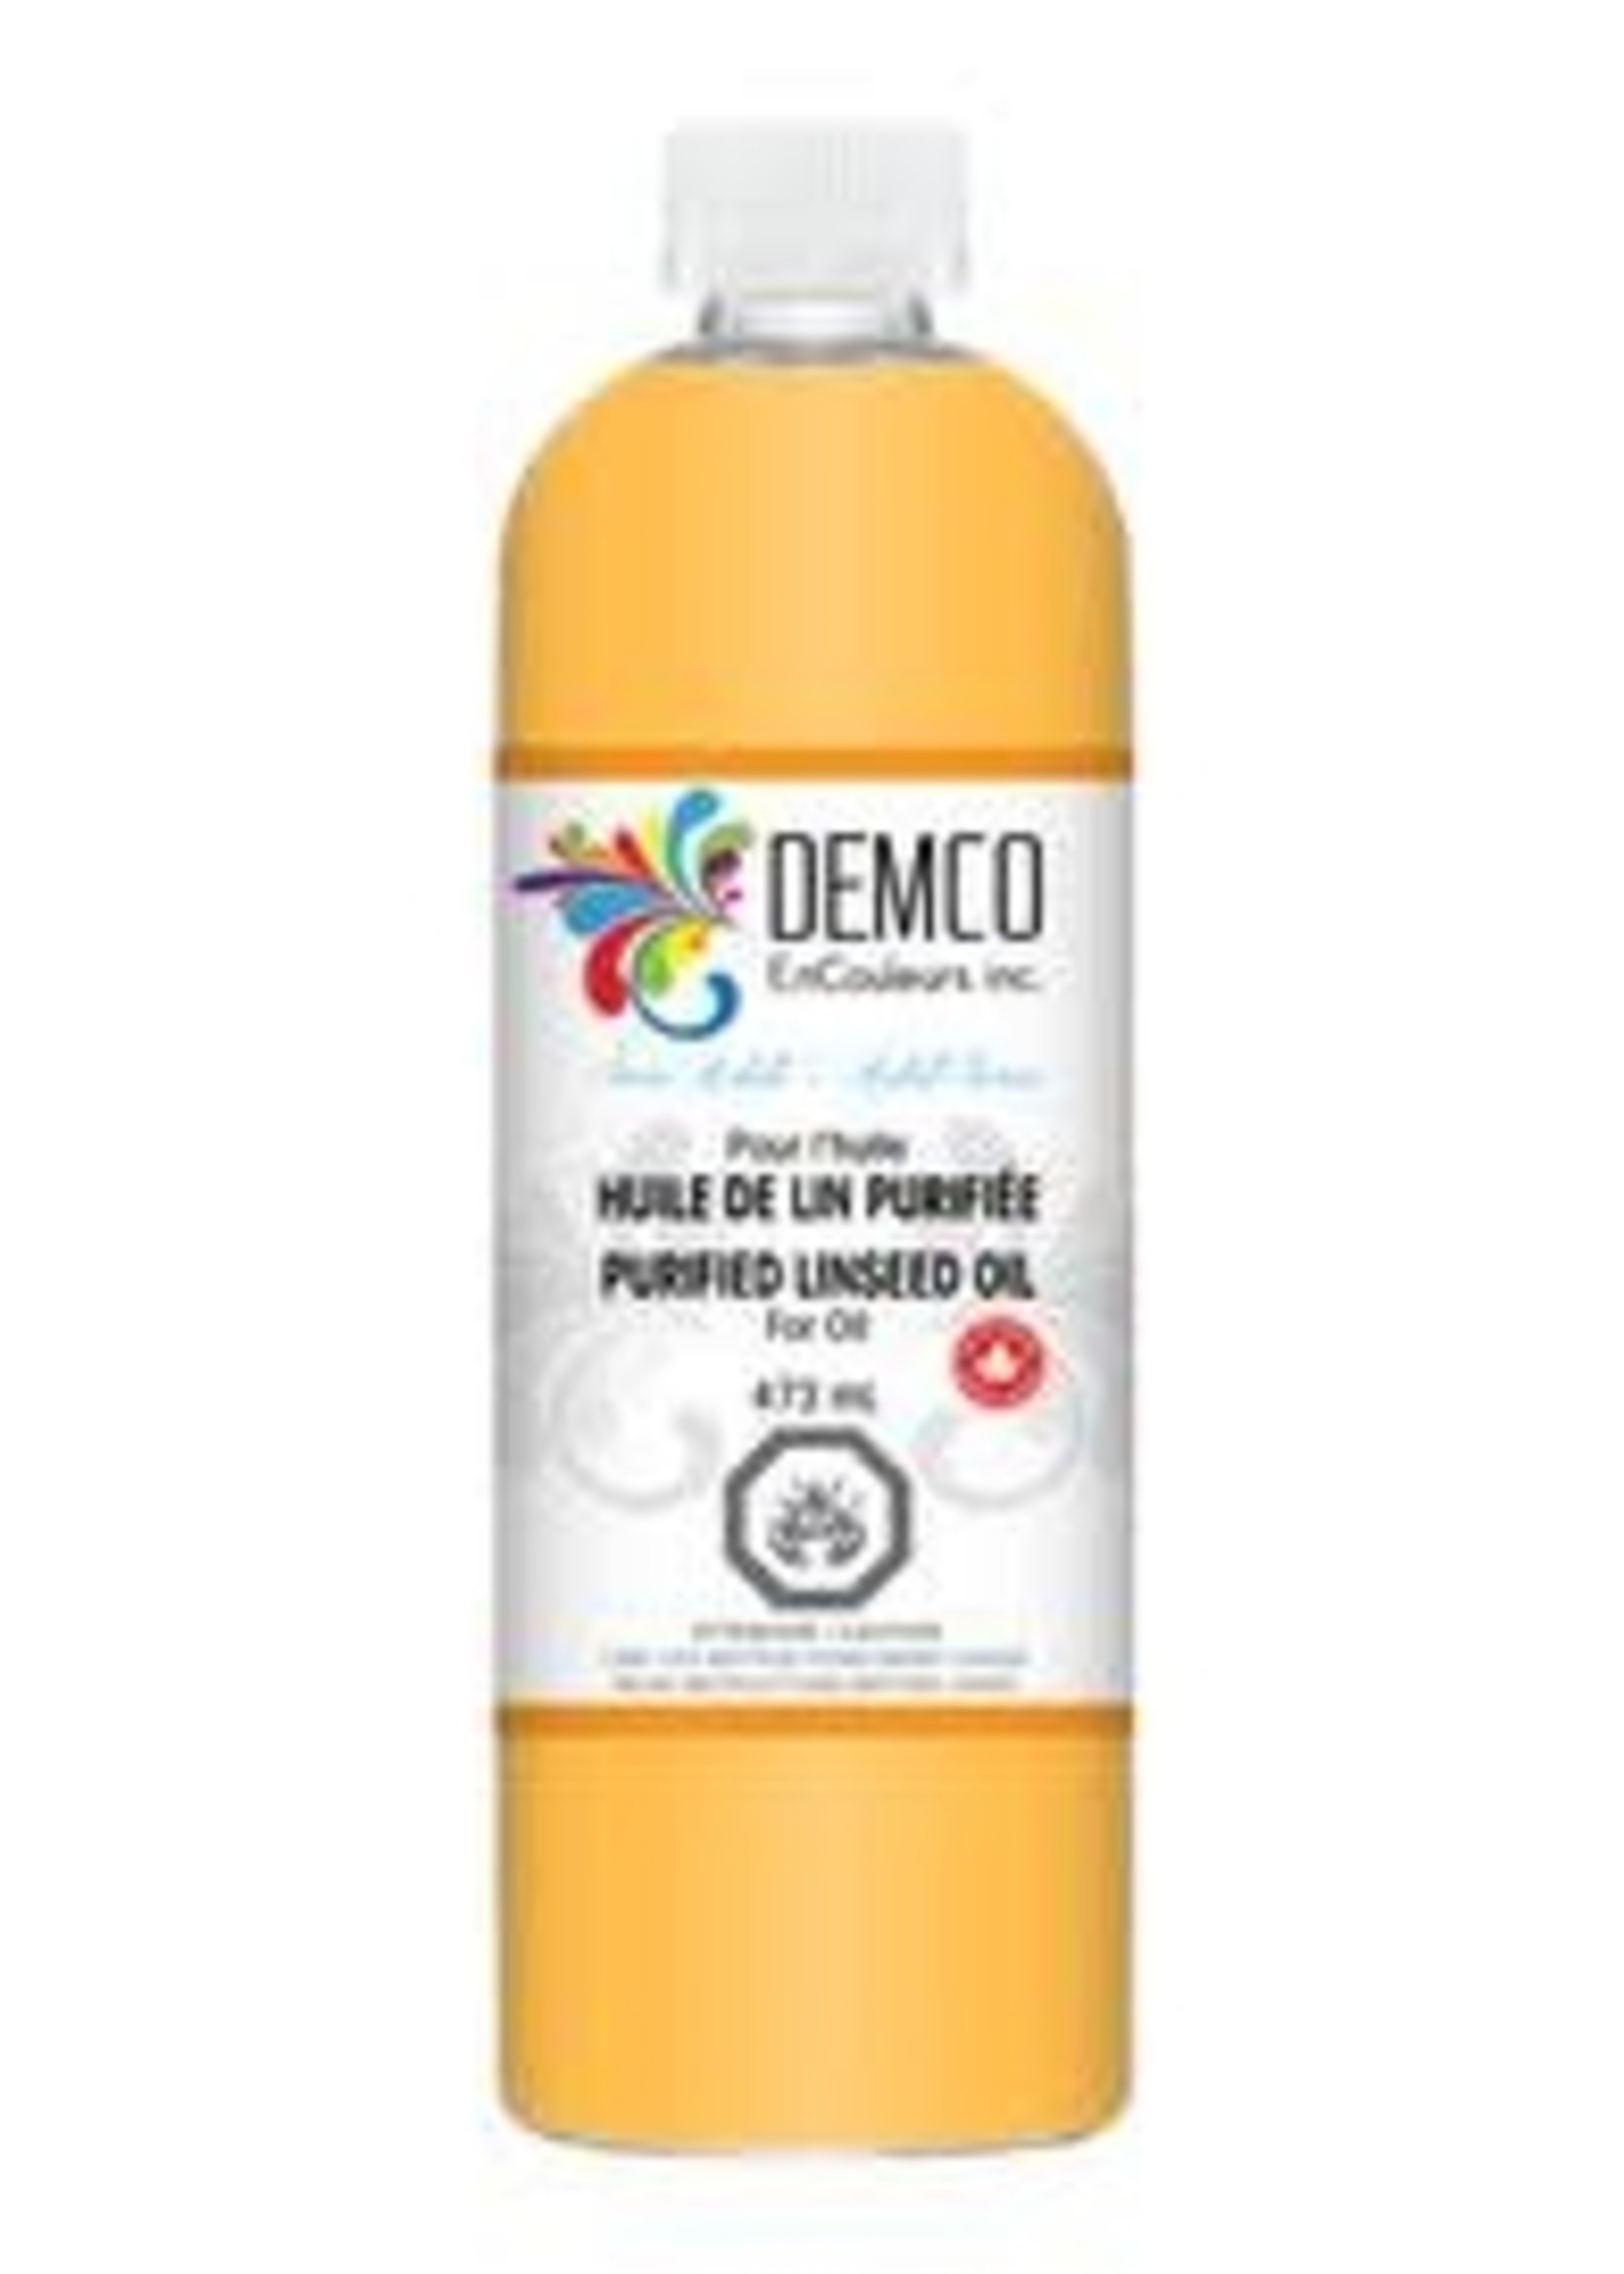 DEMCO DEMCO PURIFIED LINSEED OIL 1L / 33OZ